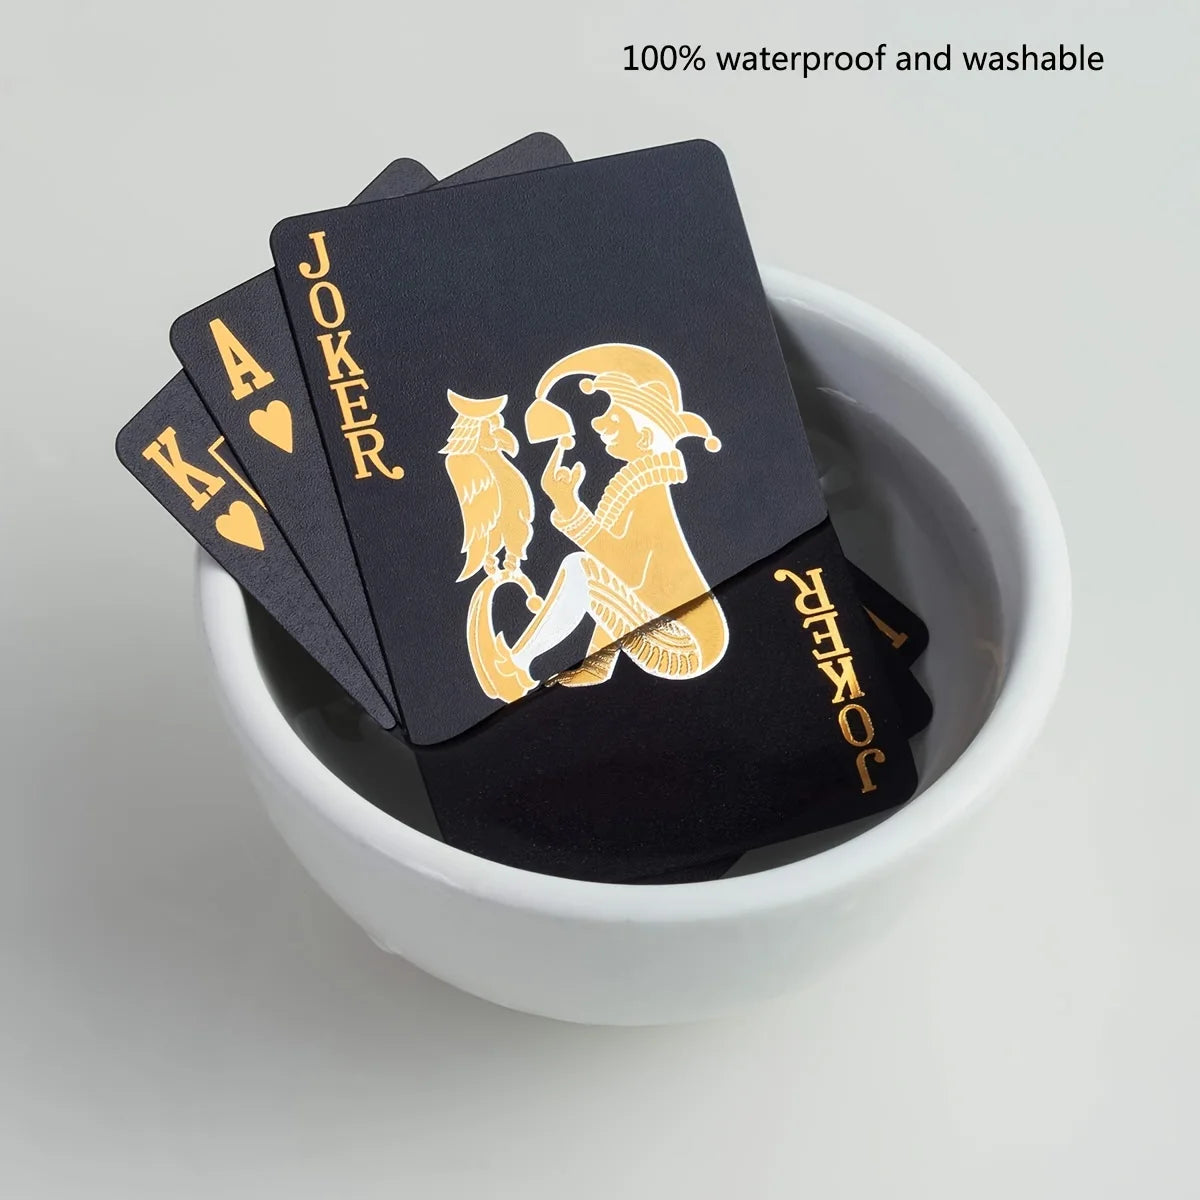 Premium Waterproof Playing Cards - Ideal for Poker and Gifts